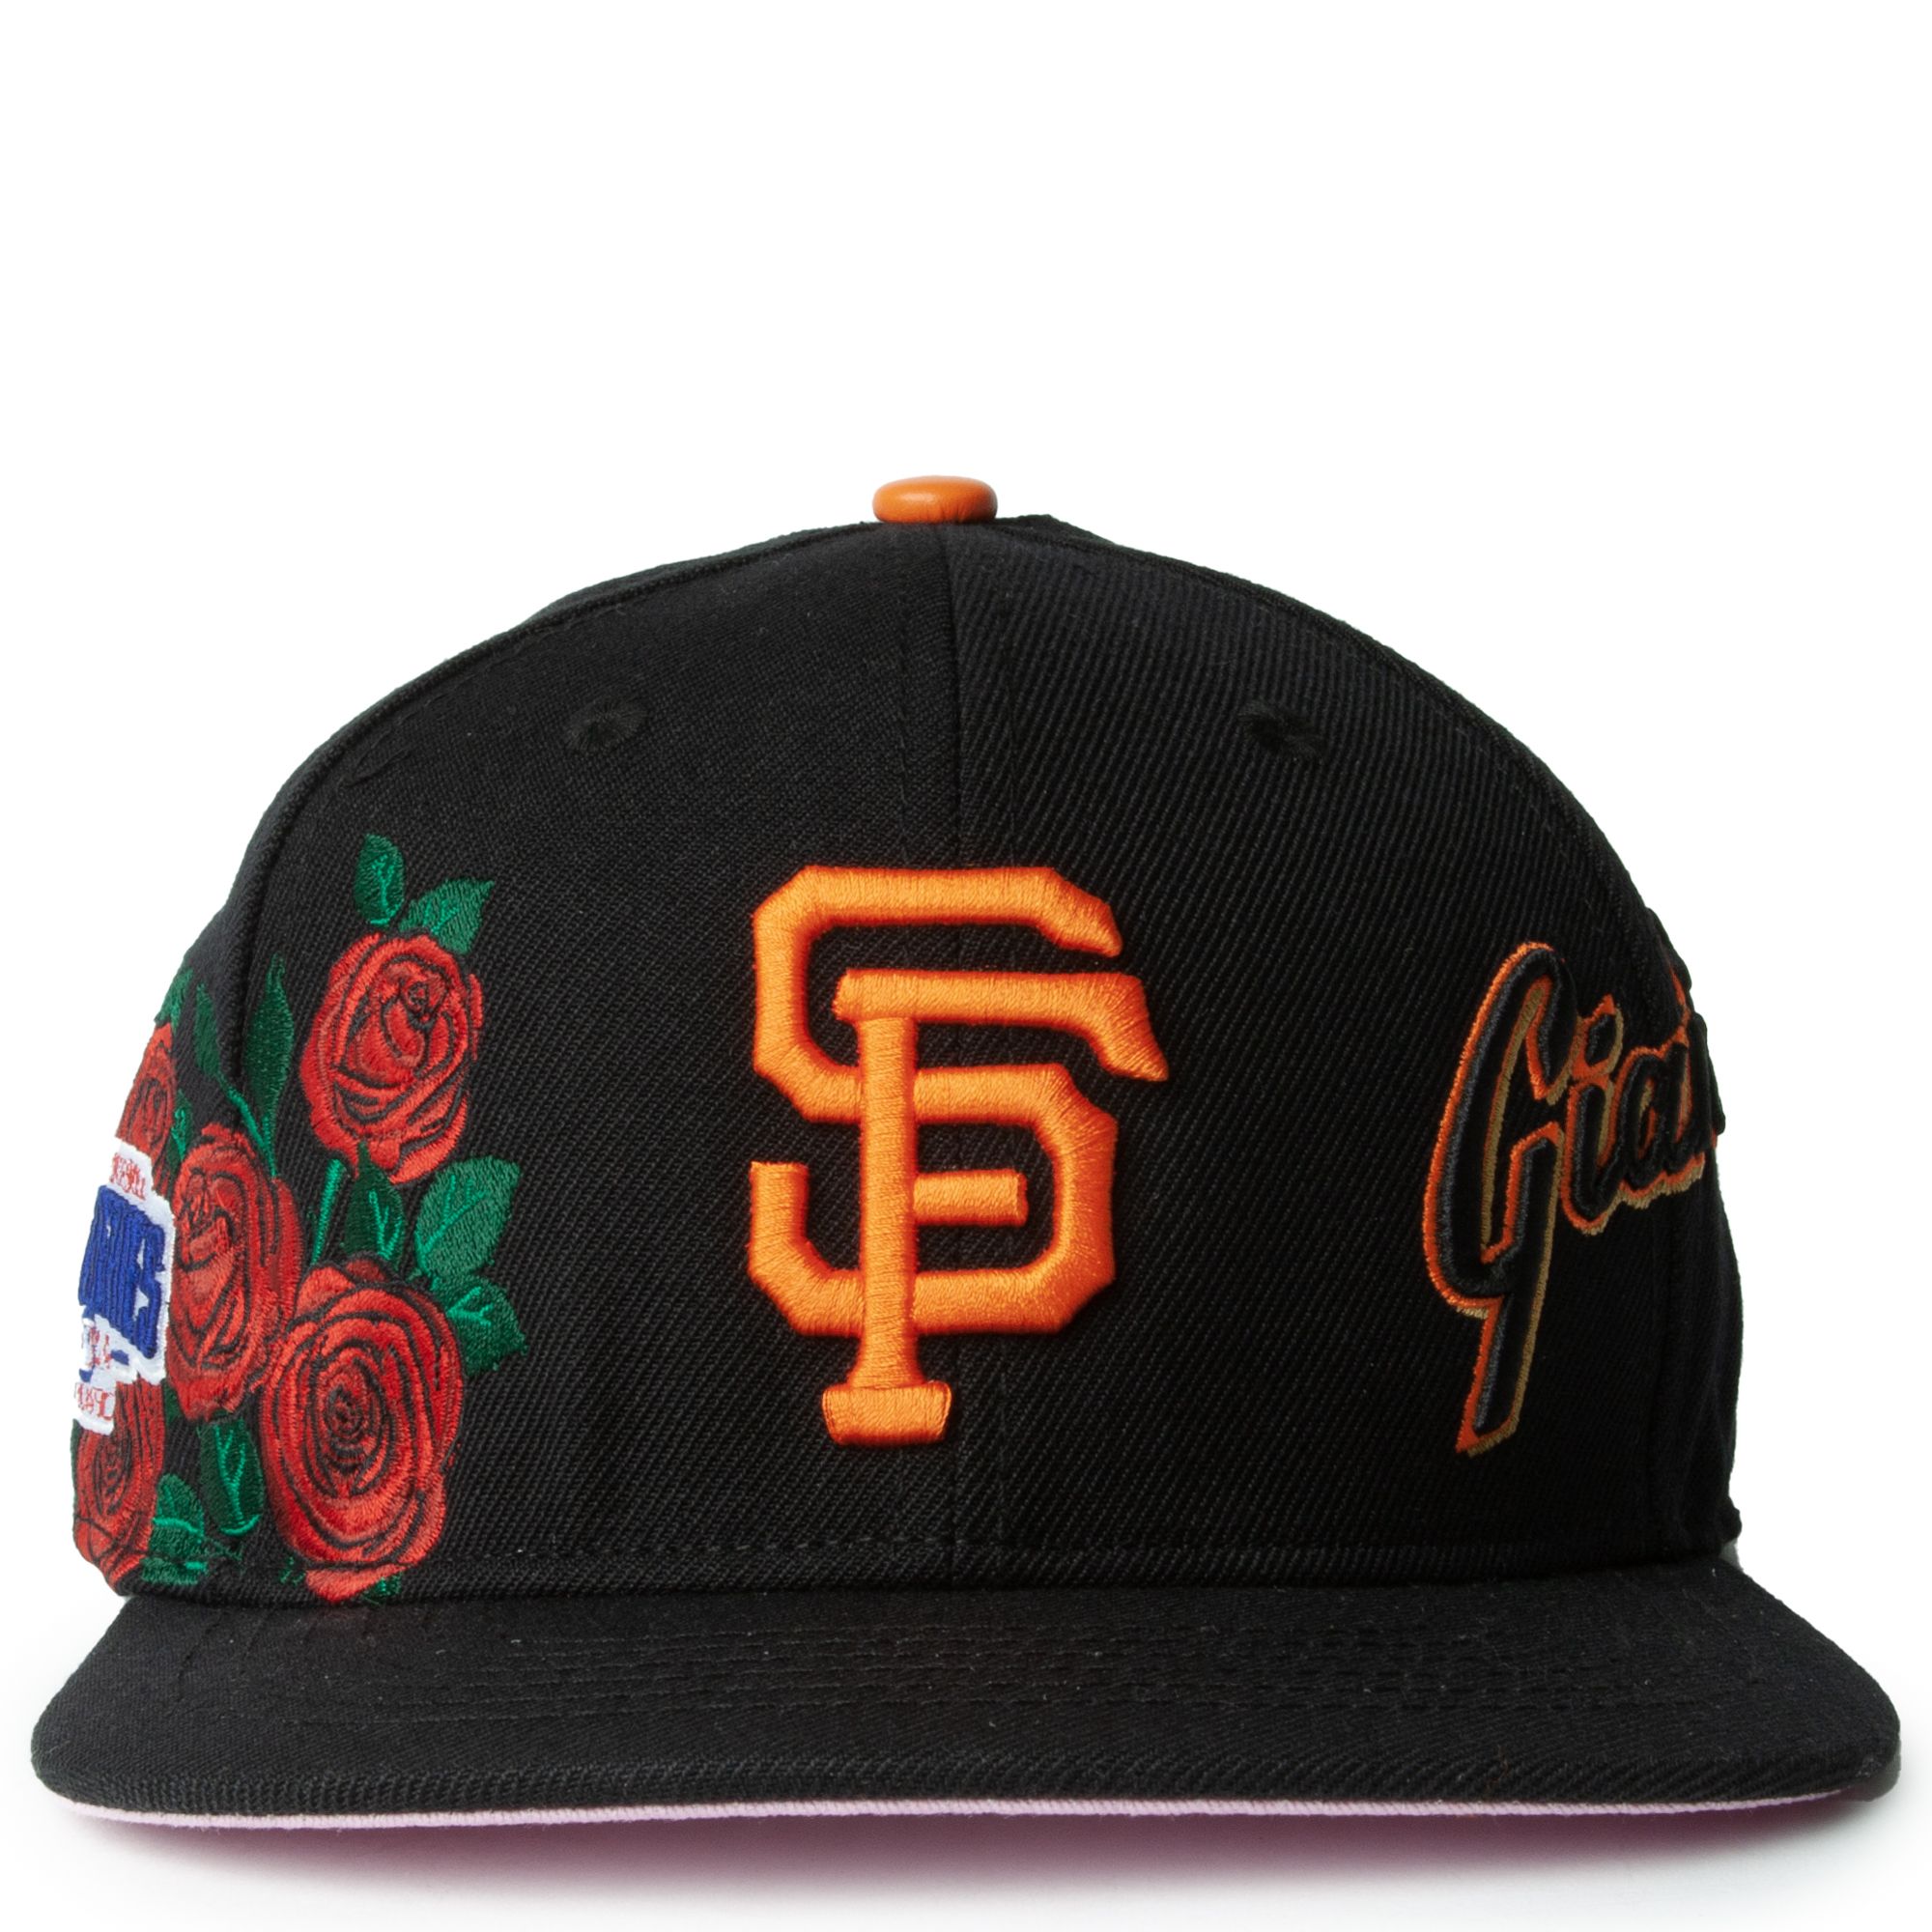 mitchell and ness sf giants hat